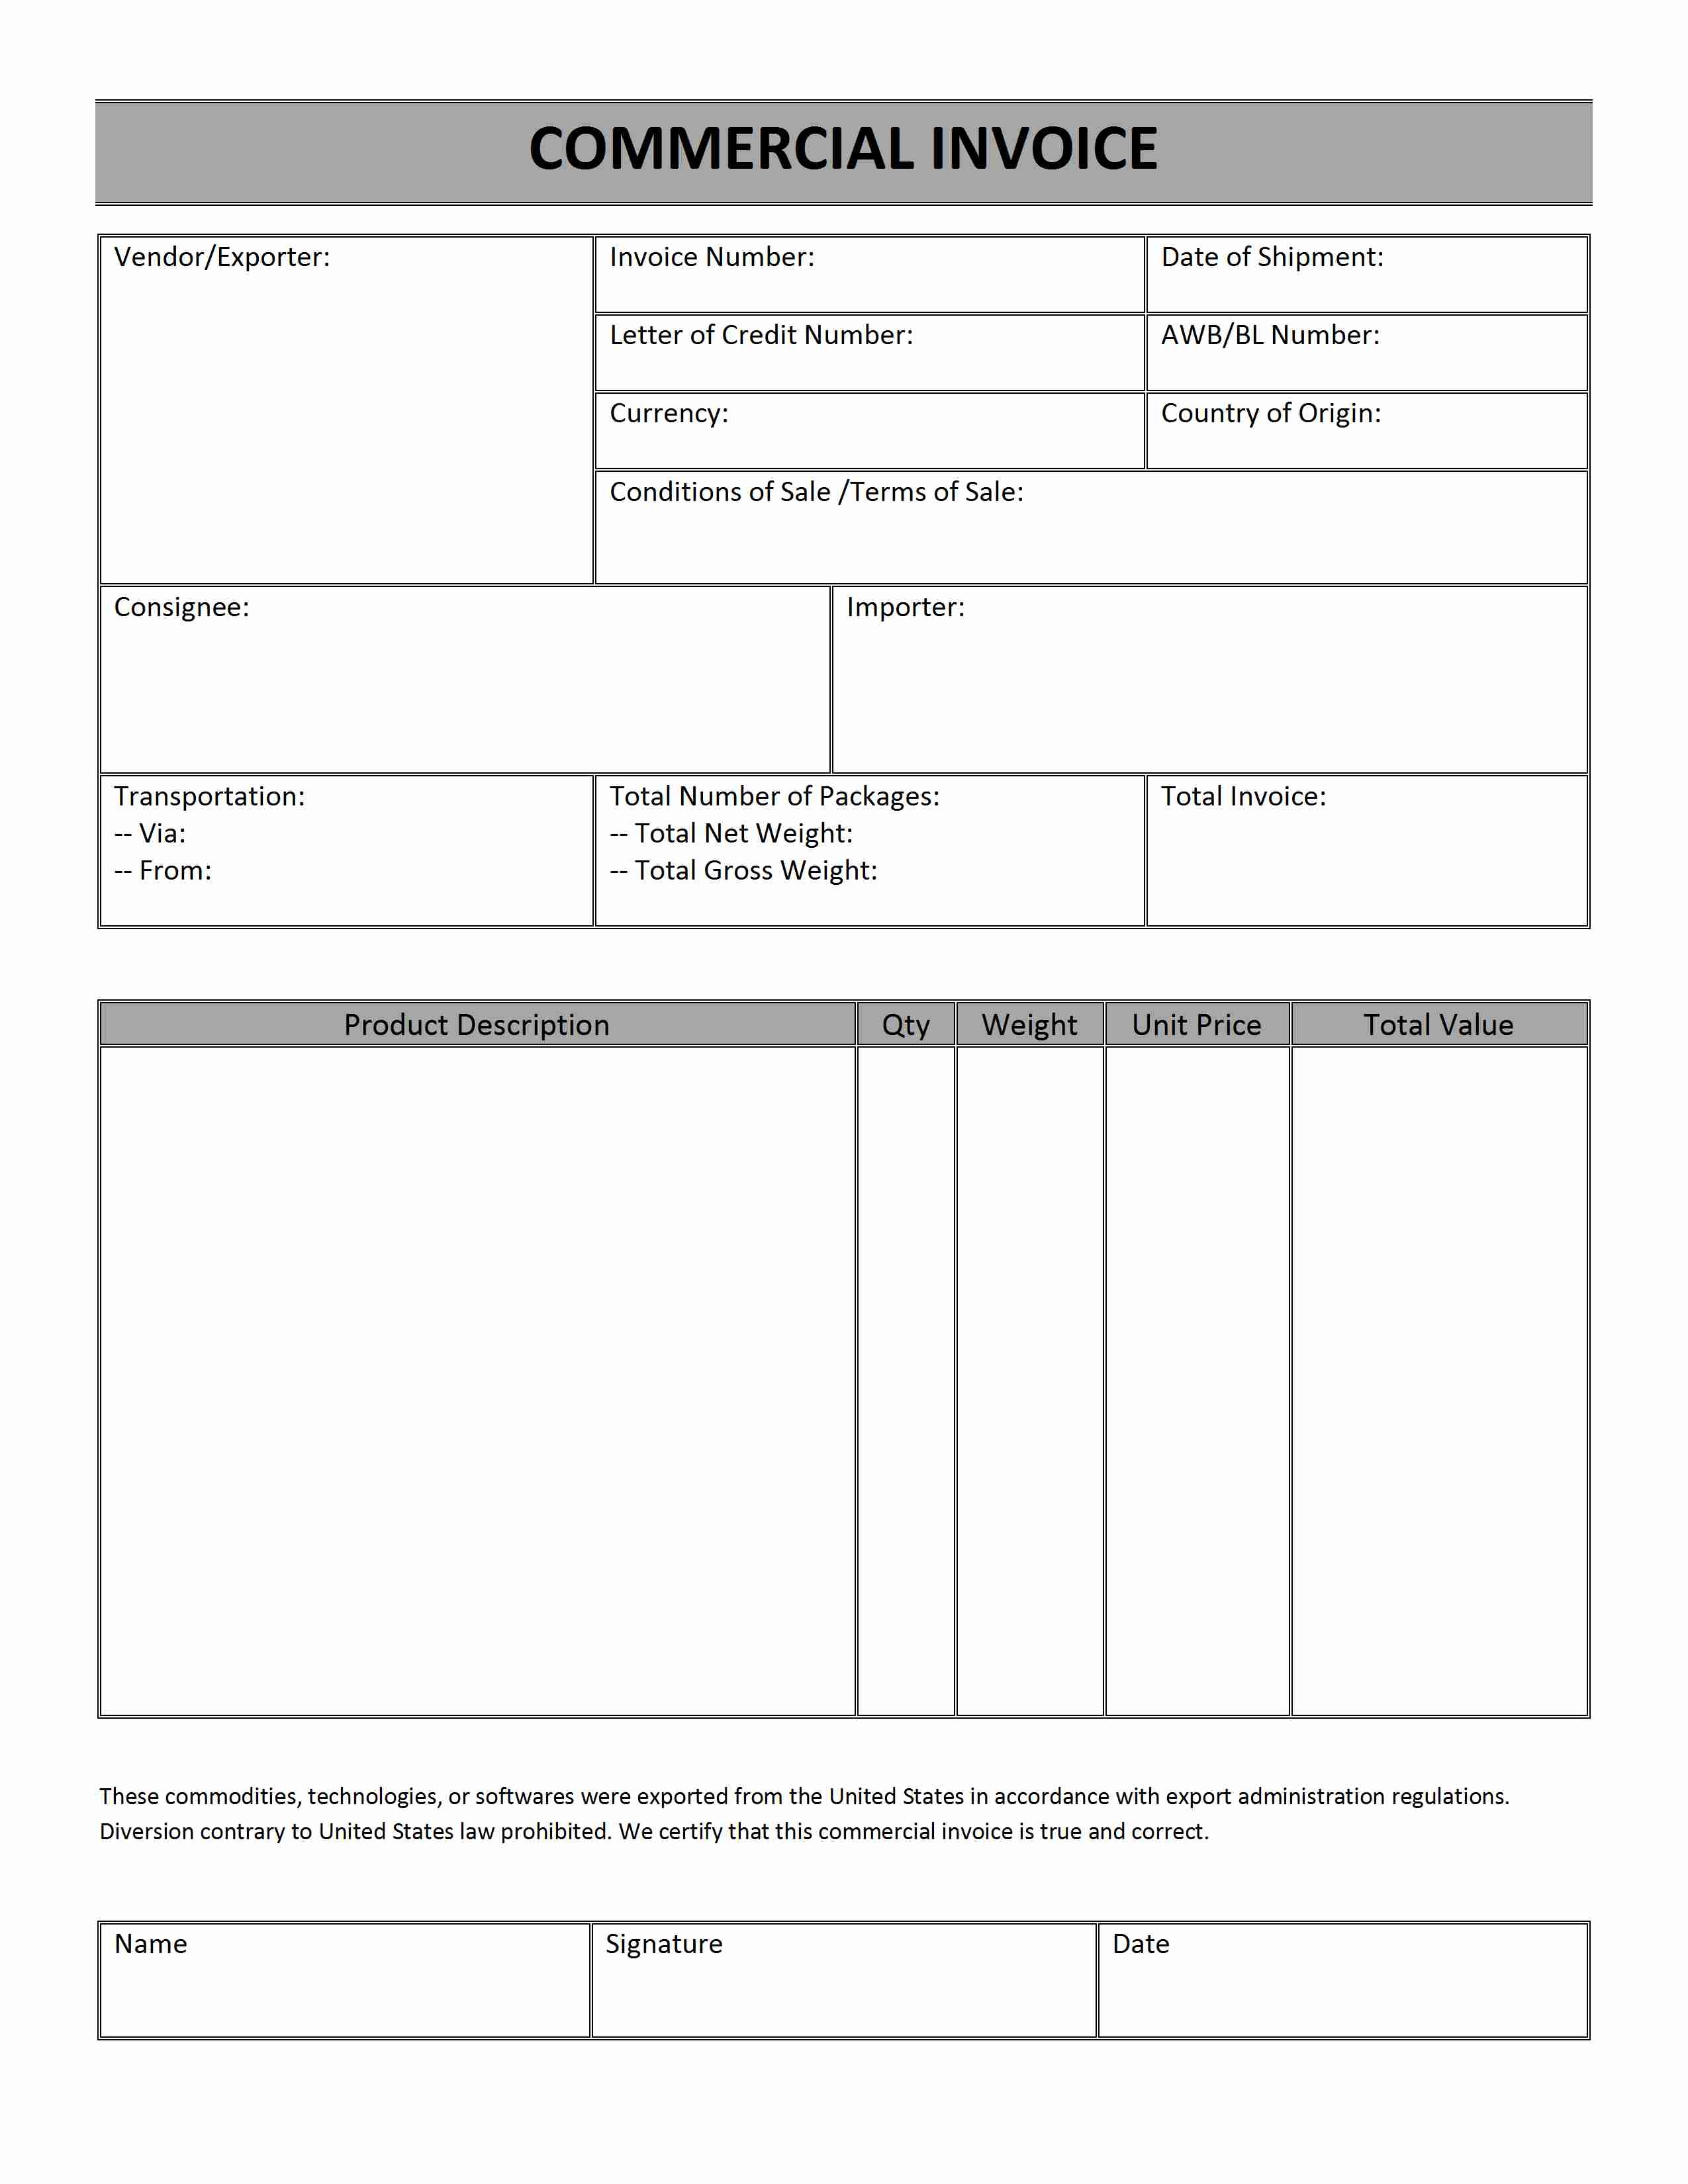 commercial invoice word templates free word templates ms commercial invoice customs